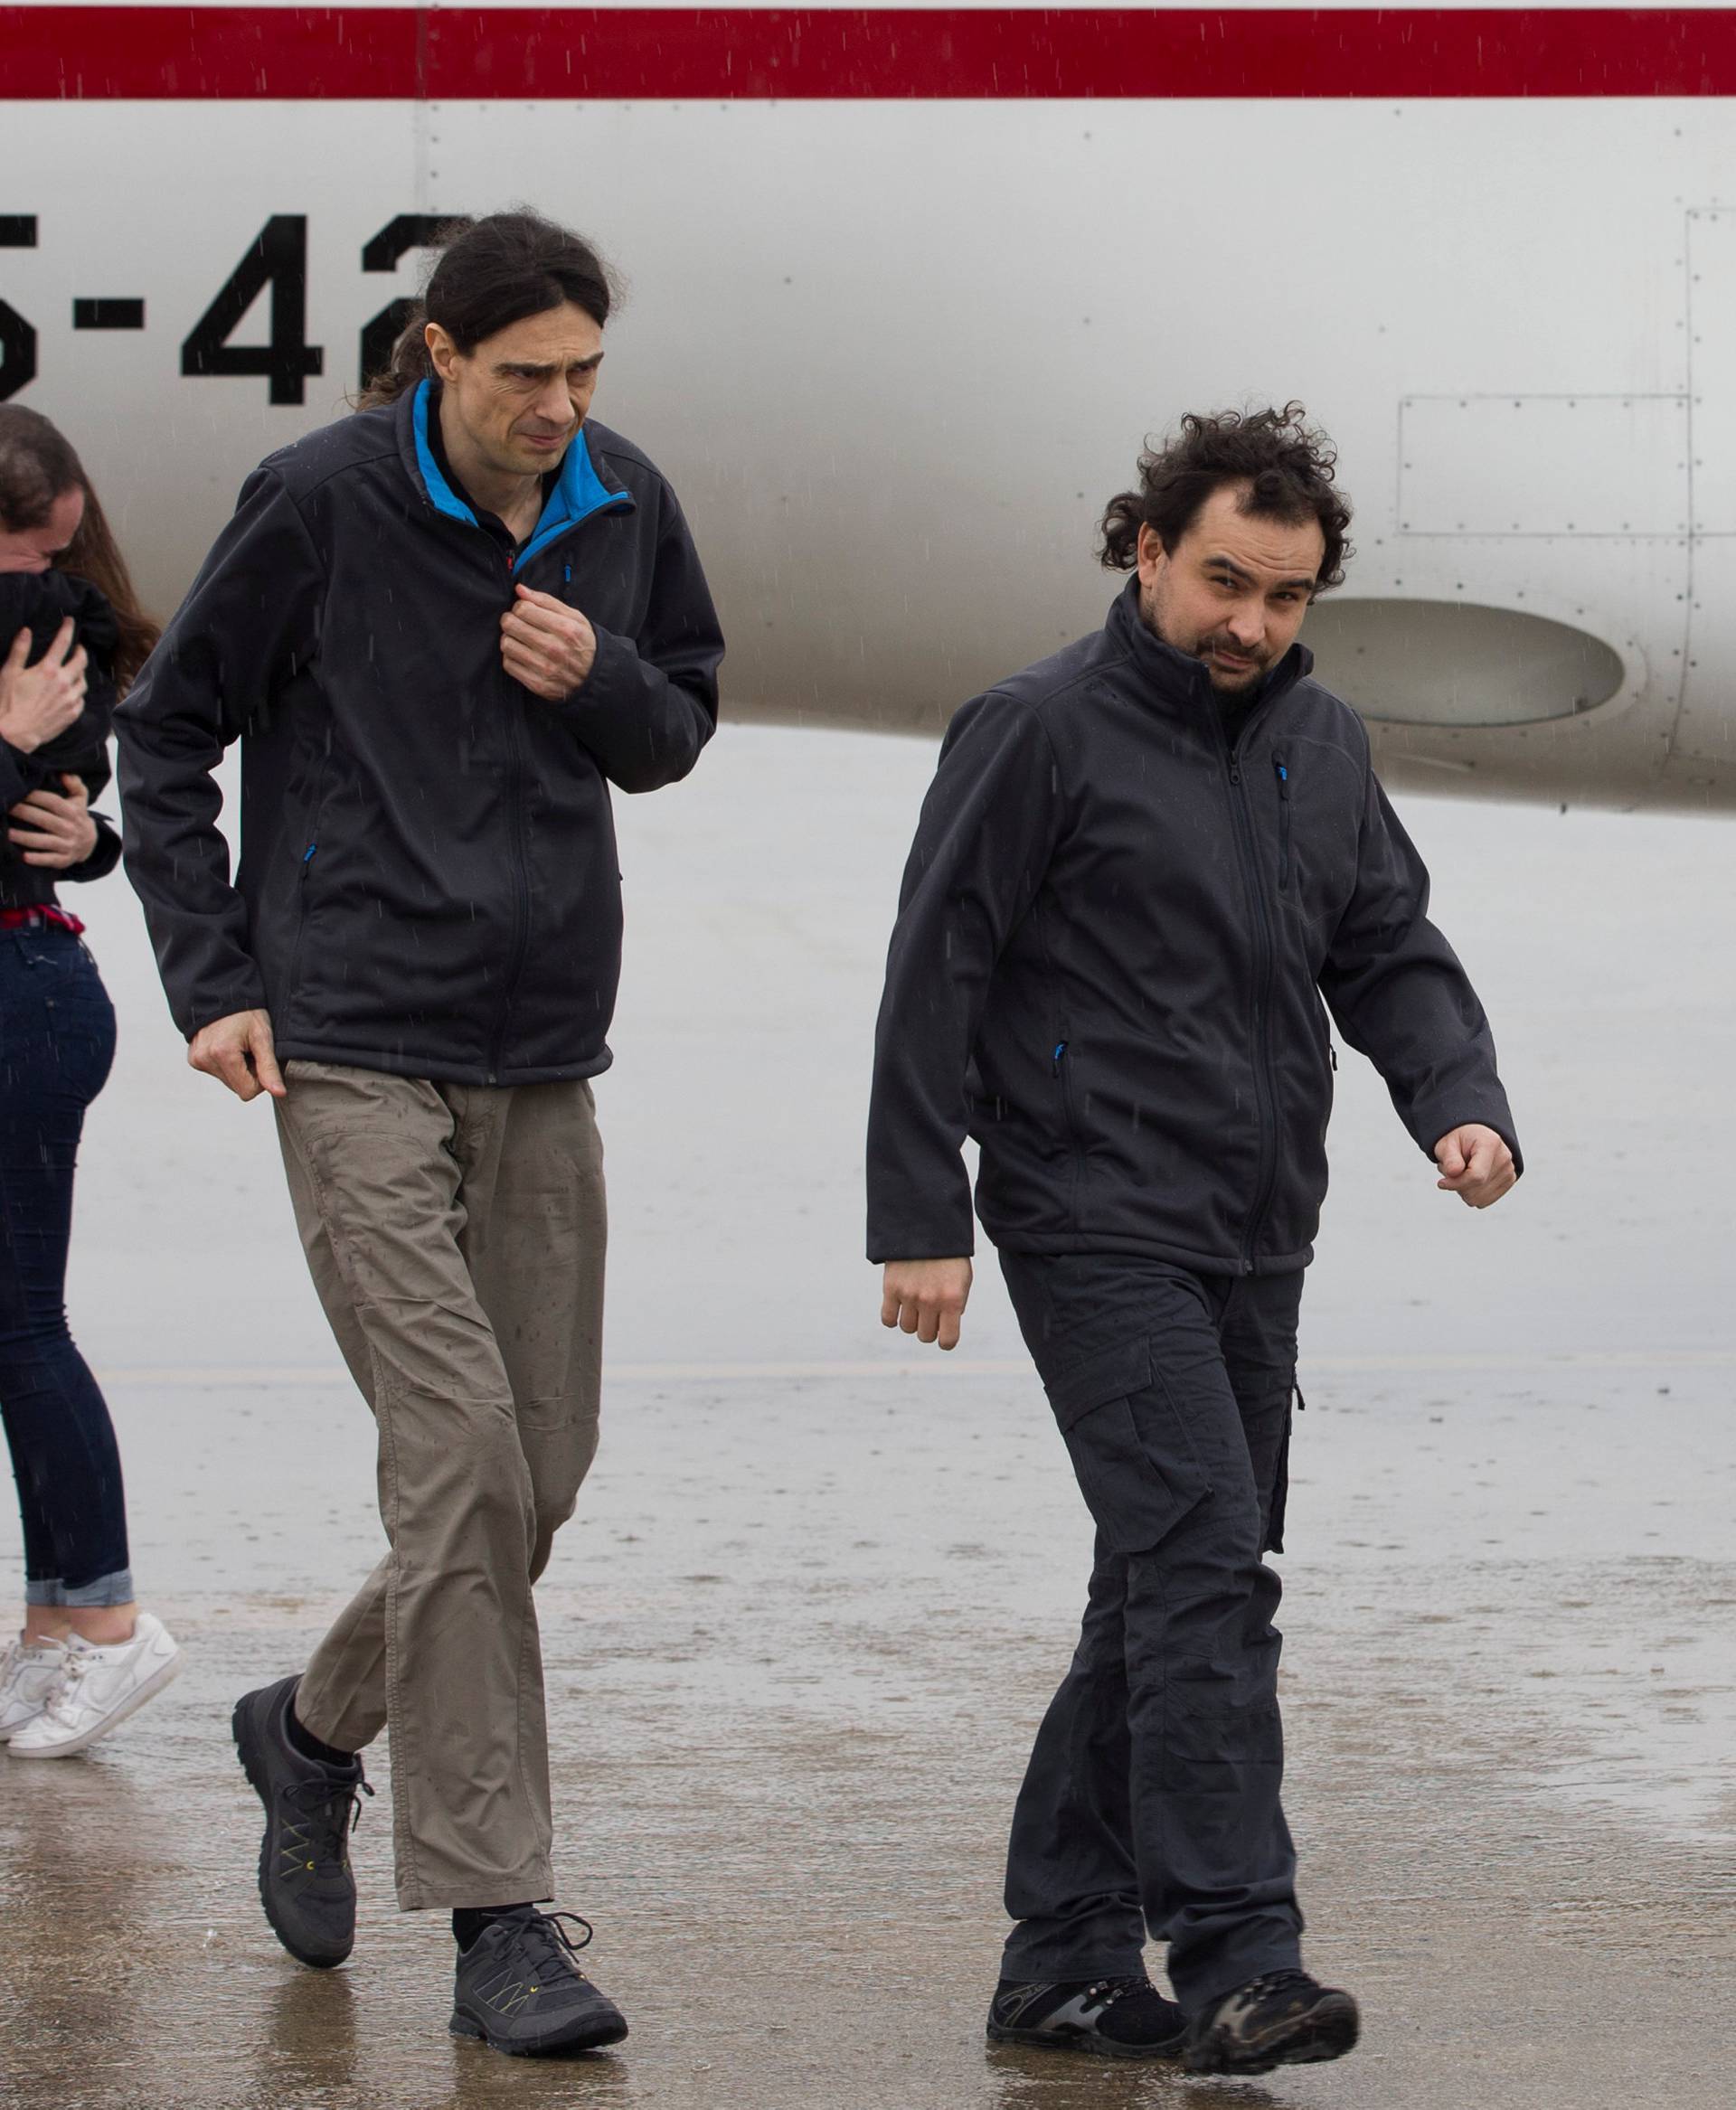 Pampliega, Lopez and Sastre, three Spanish freelance journalists who went missing in Syria last year and were believed to have been kidnapped, arrive at Torrejon's military airport, Spain